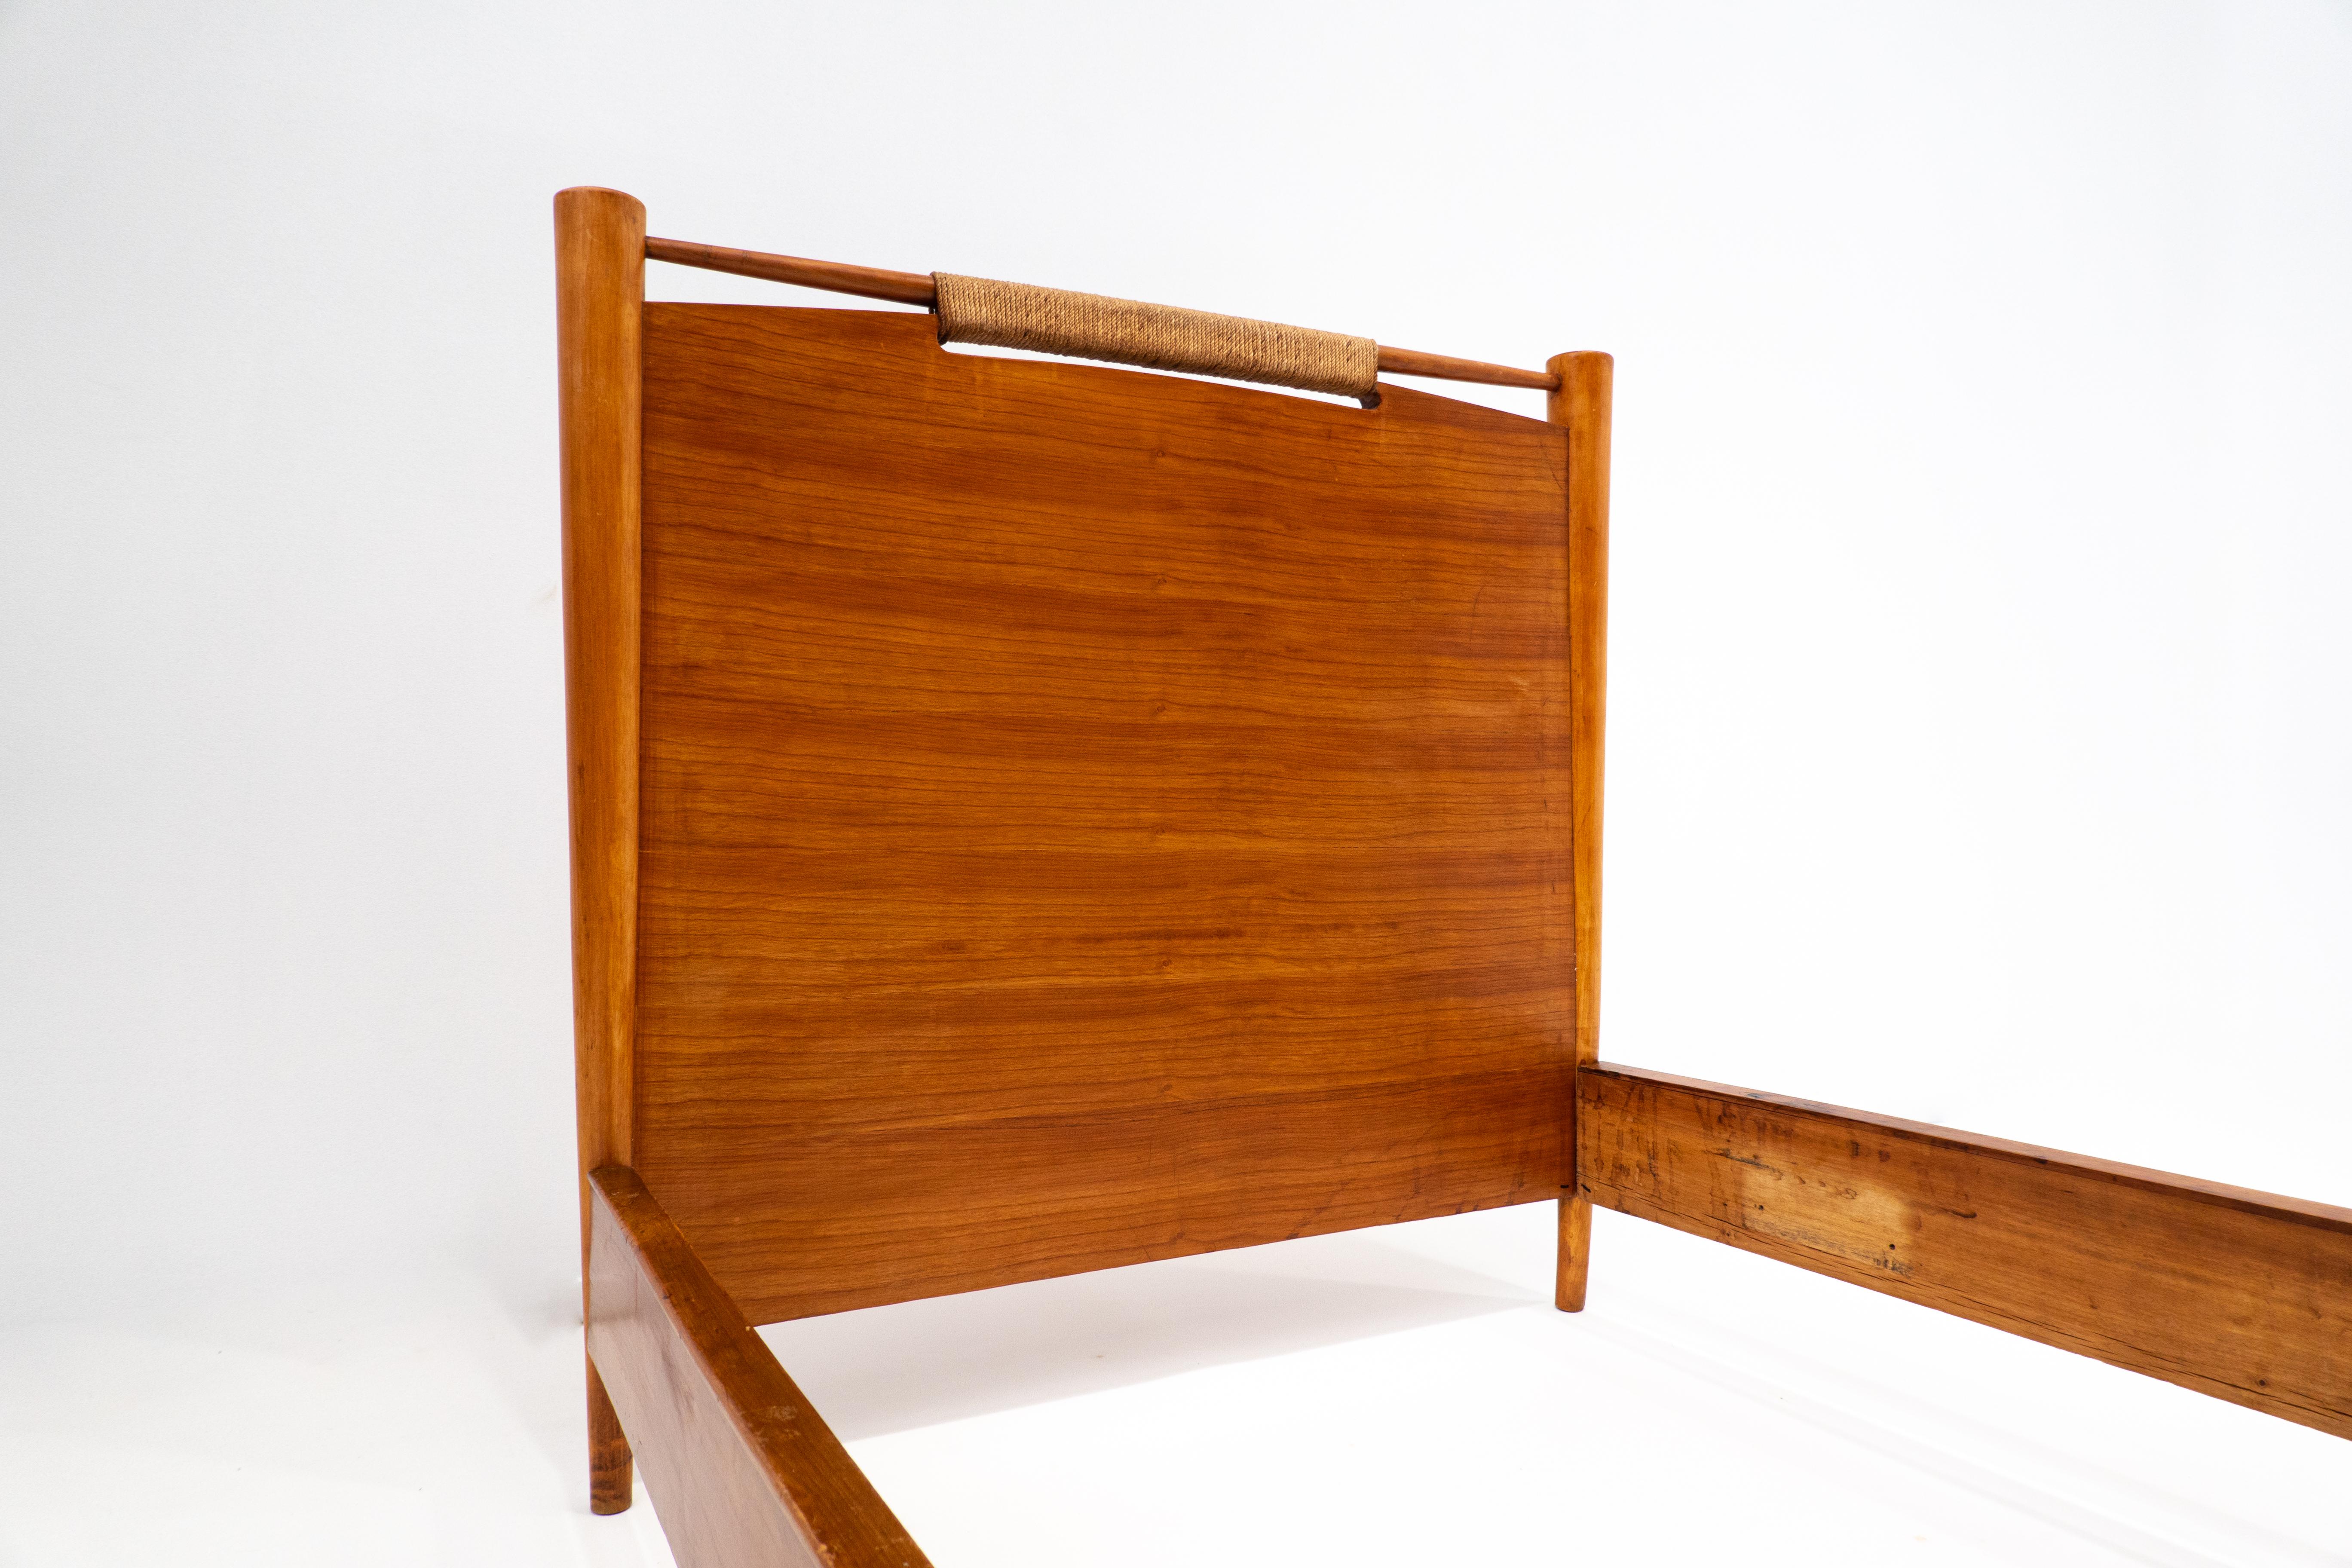 Pair of Beds Attributed to Guglielmo Pecorini, Cherry Wood, Italy, 1940s For Sale 1